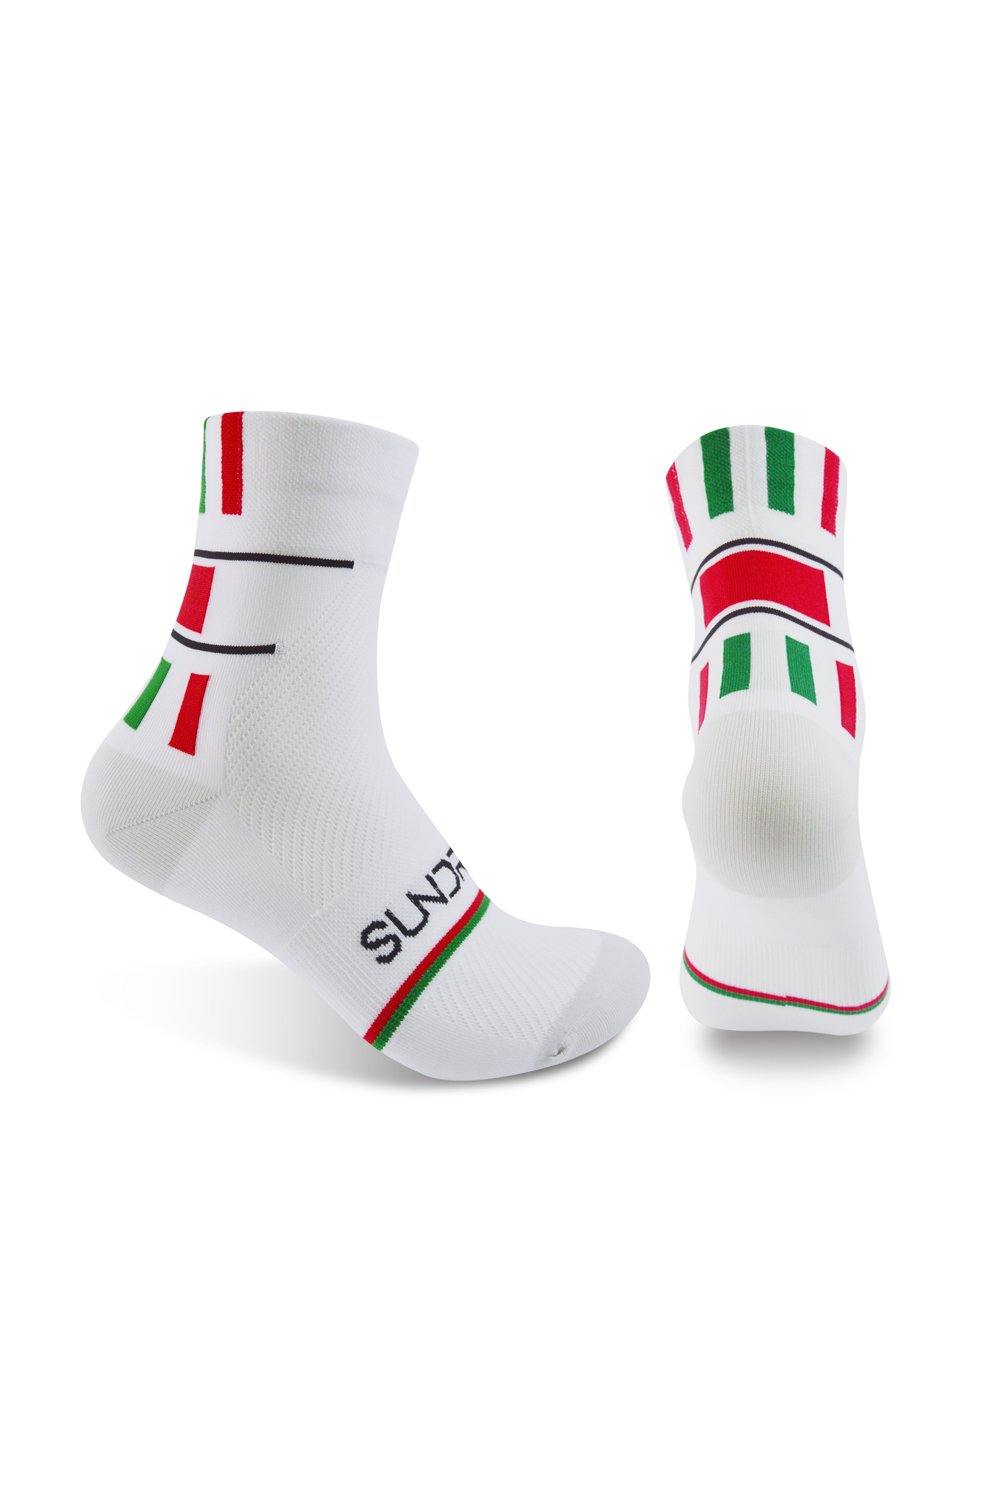 Sundried Cycle Socks White w Red/Green Socks L/XL White SD0200 LXL White Activewear